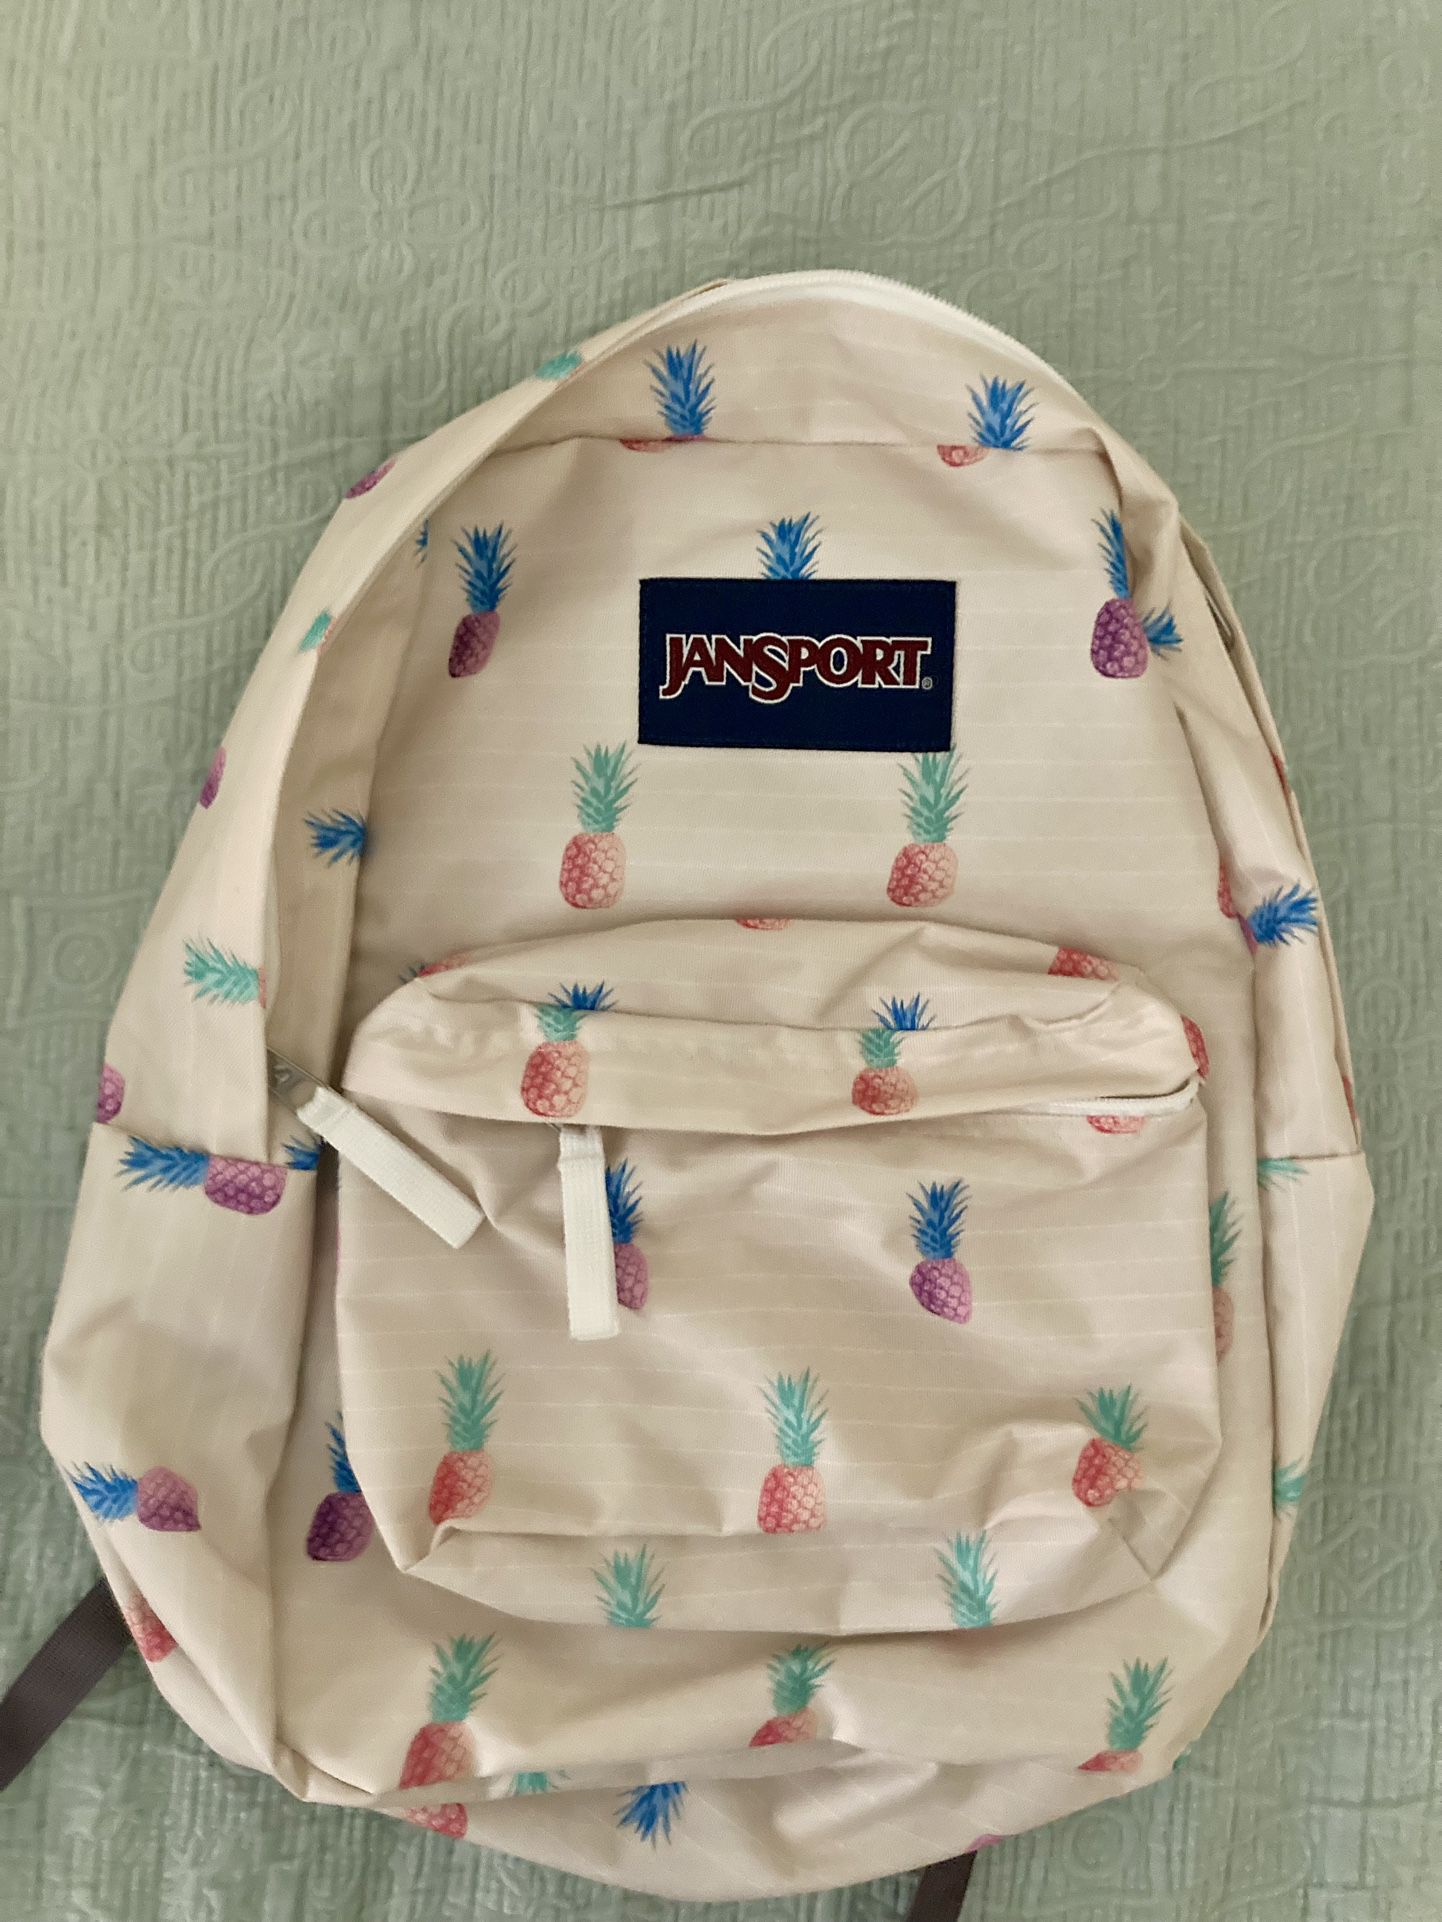 Jansport Backpack. Brand New! Great Valentine Gift.  Pineapple Theme.